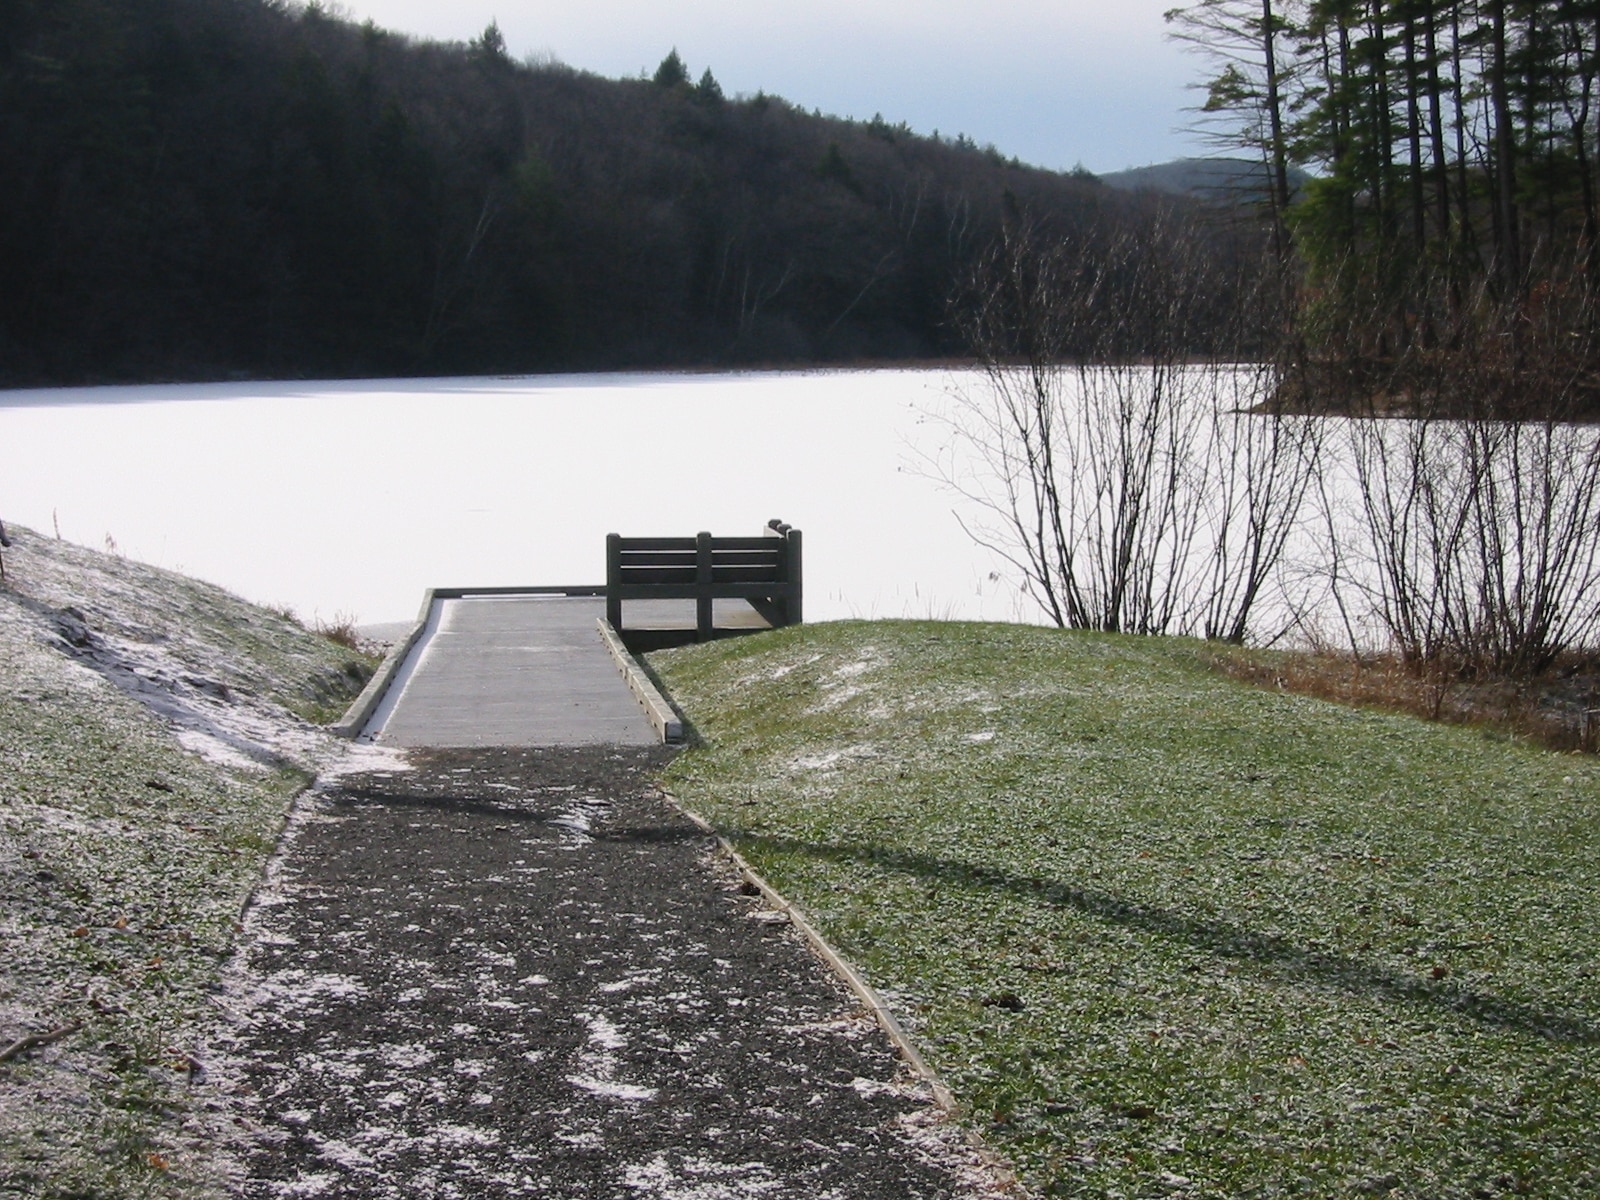 A paved path slopes gently down to a platform with a curb. The platform extends over a lake covered in ice and snow.